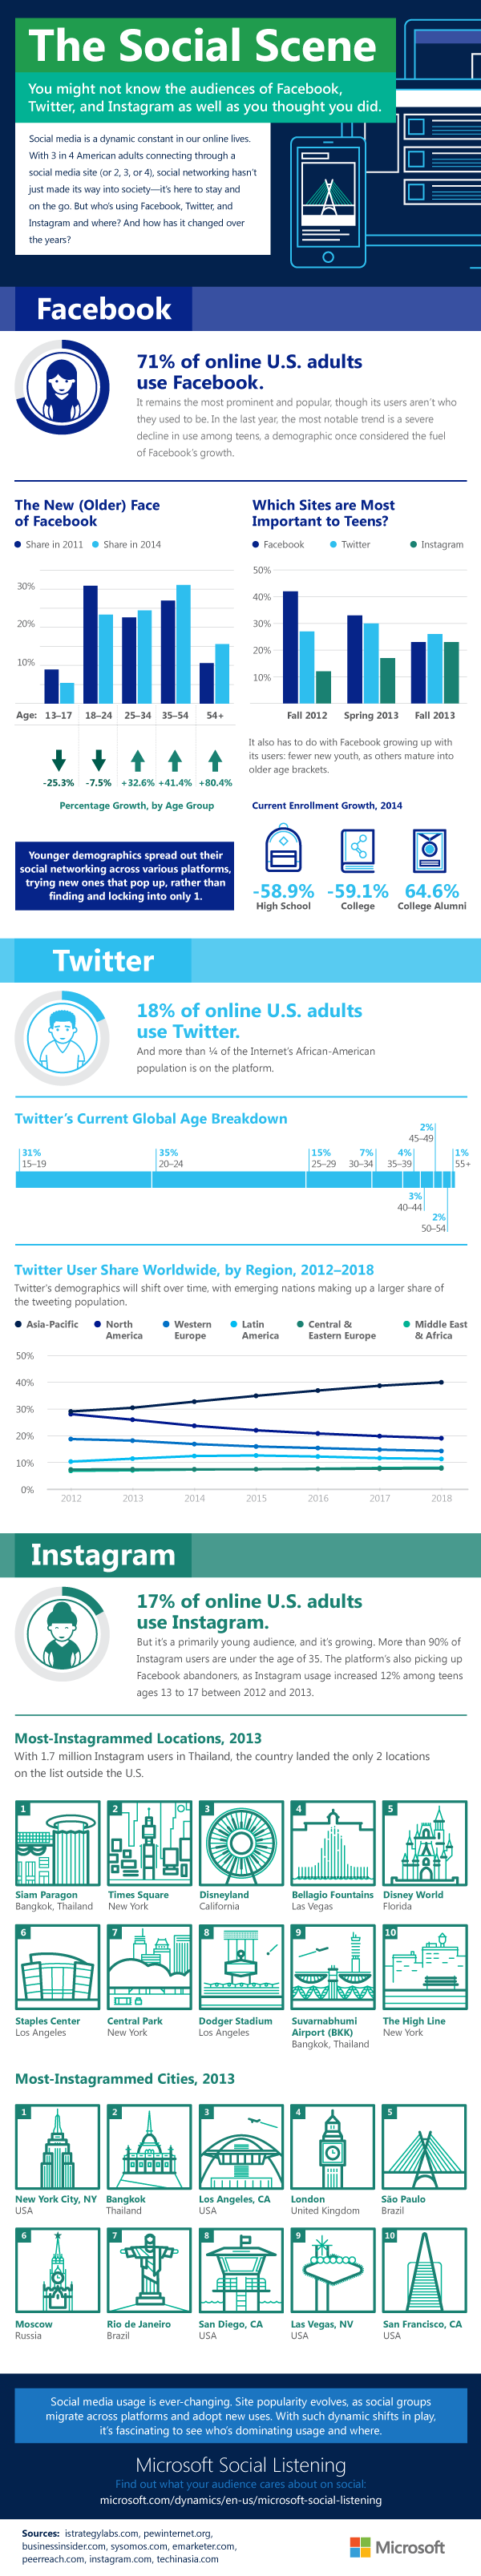 The Social Scene of Facebook, Twitter and Instagram - infographic - Just Who Uses Social Media Sites? A Demographic Breakdown